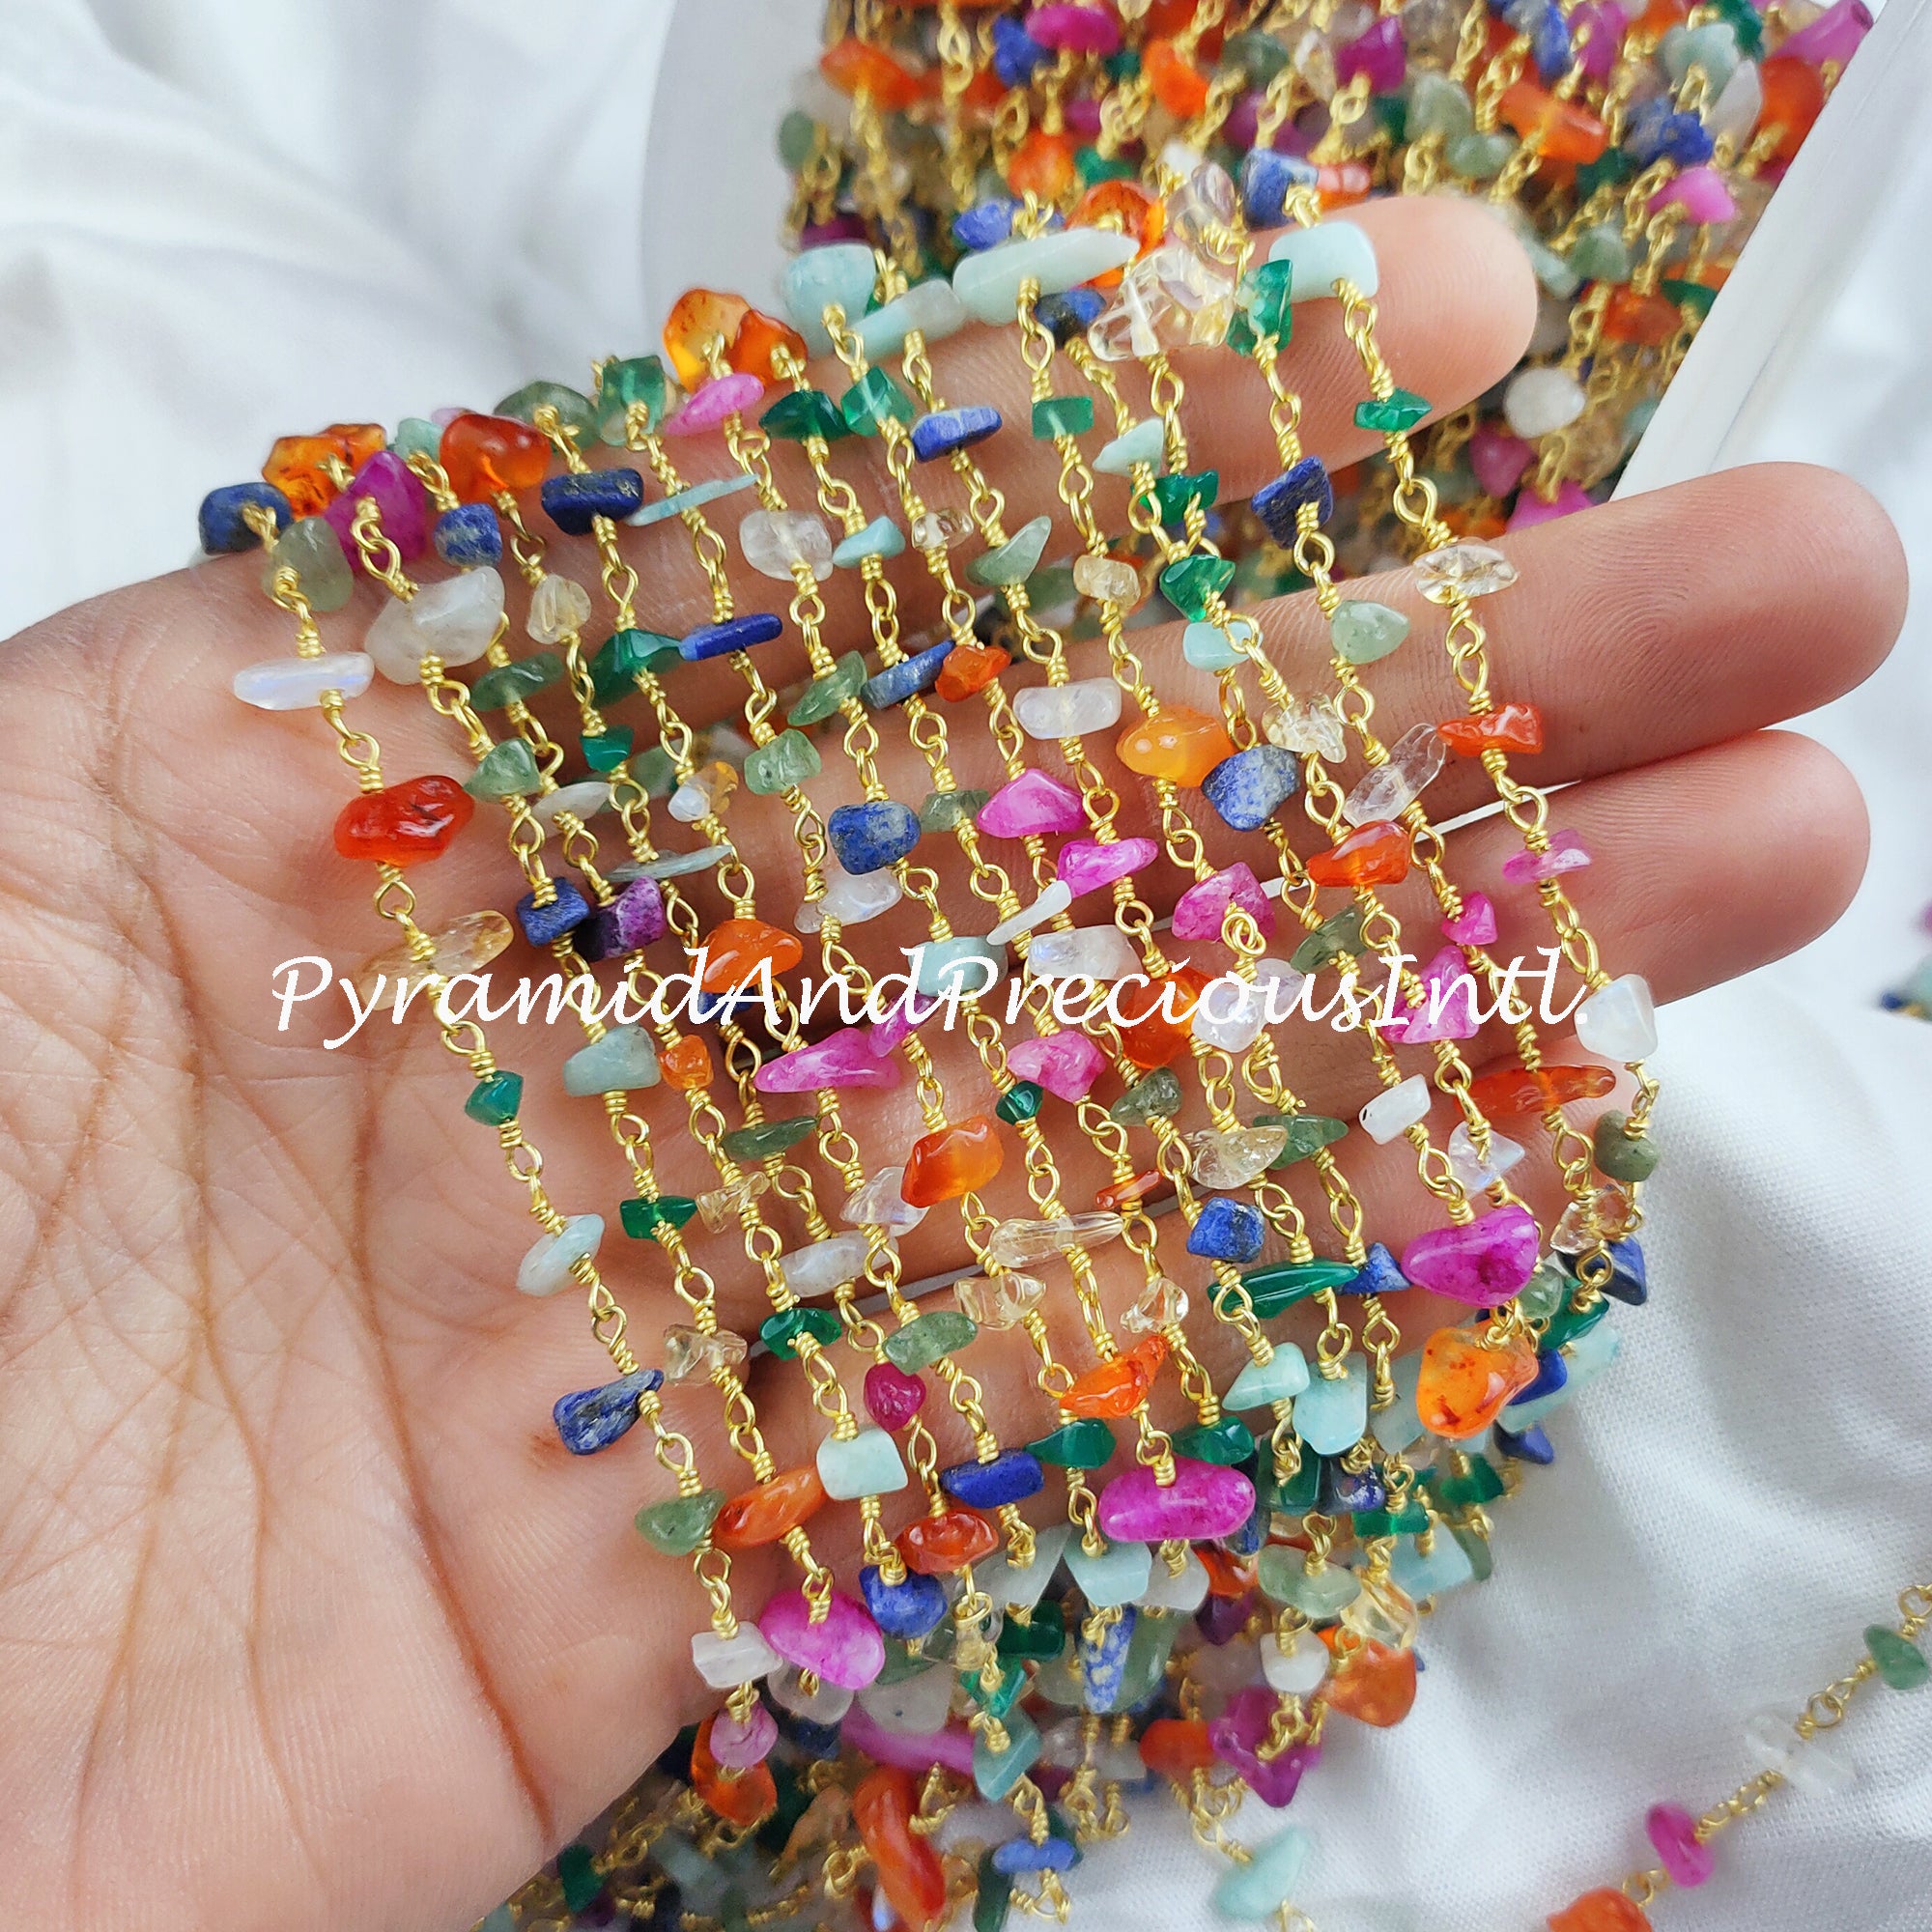 Natural Multi Disco Chain, Beads Chain, Uncut Chain, Jewelry Making Chain, Women Chain, Necklace Chain – SELLING BY FOOT